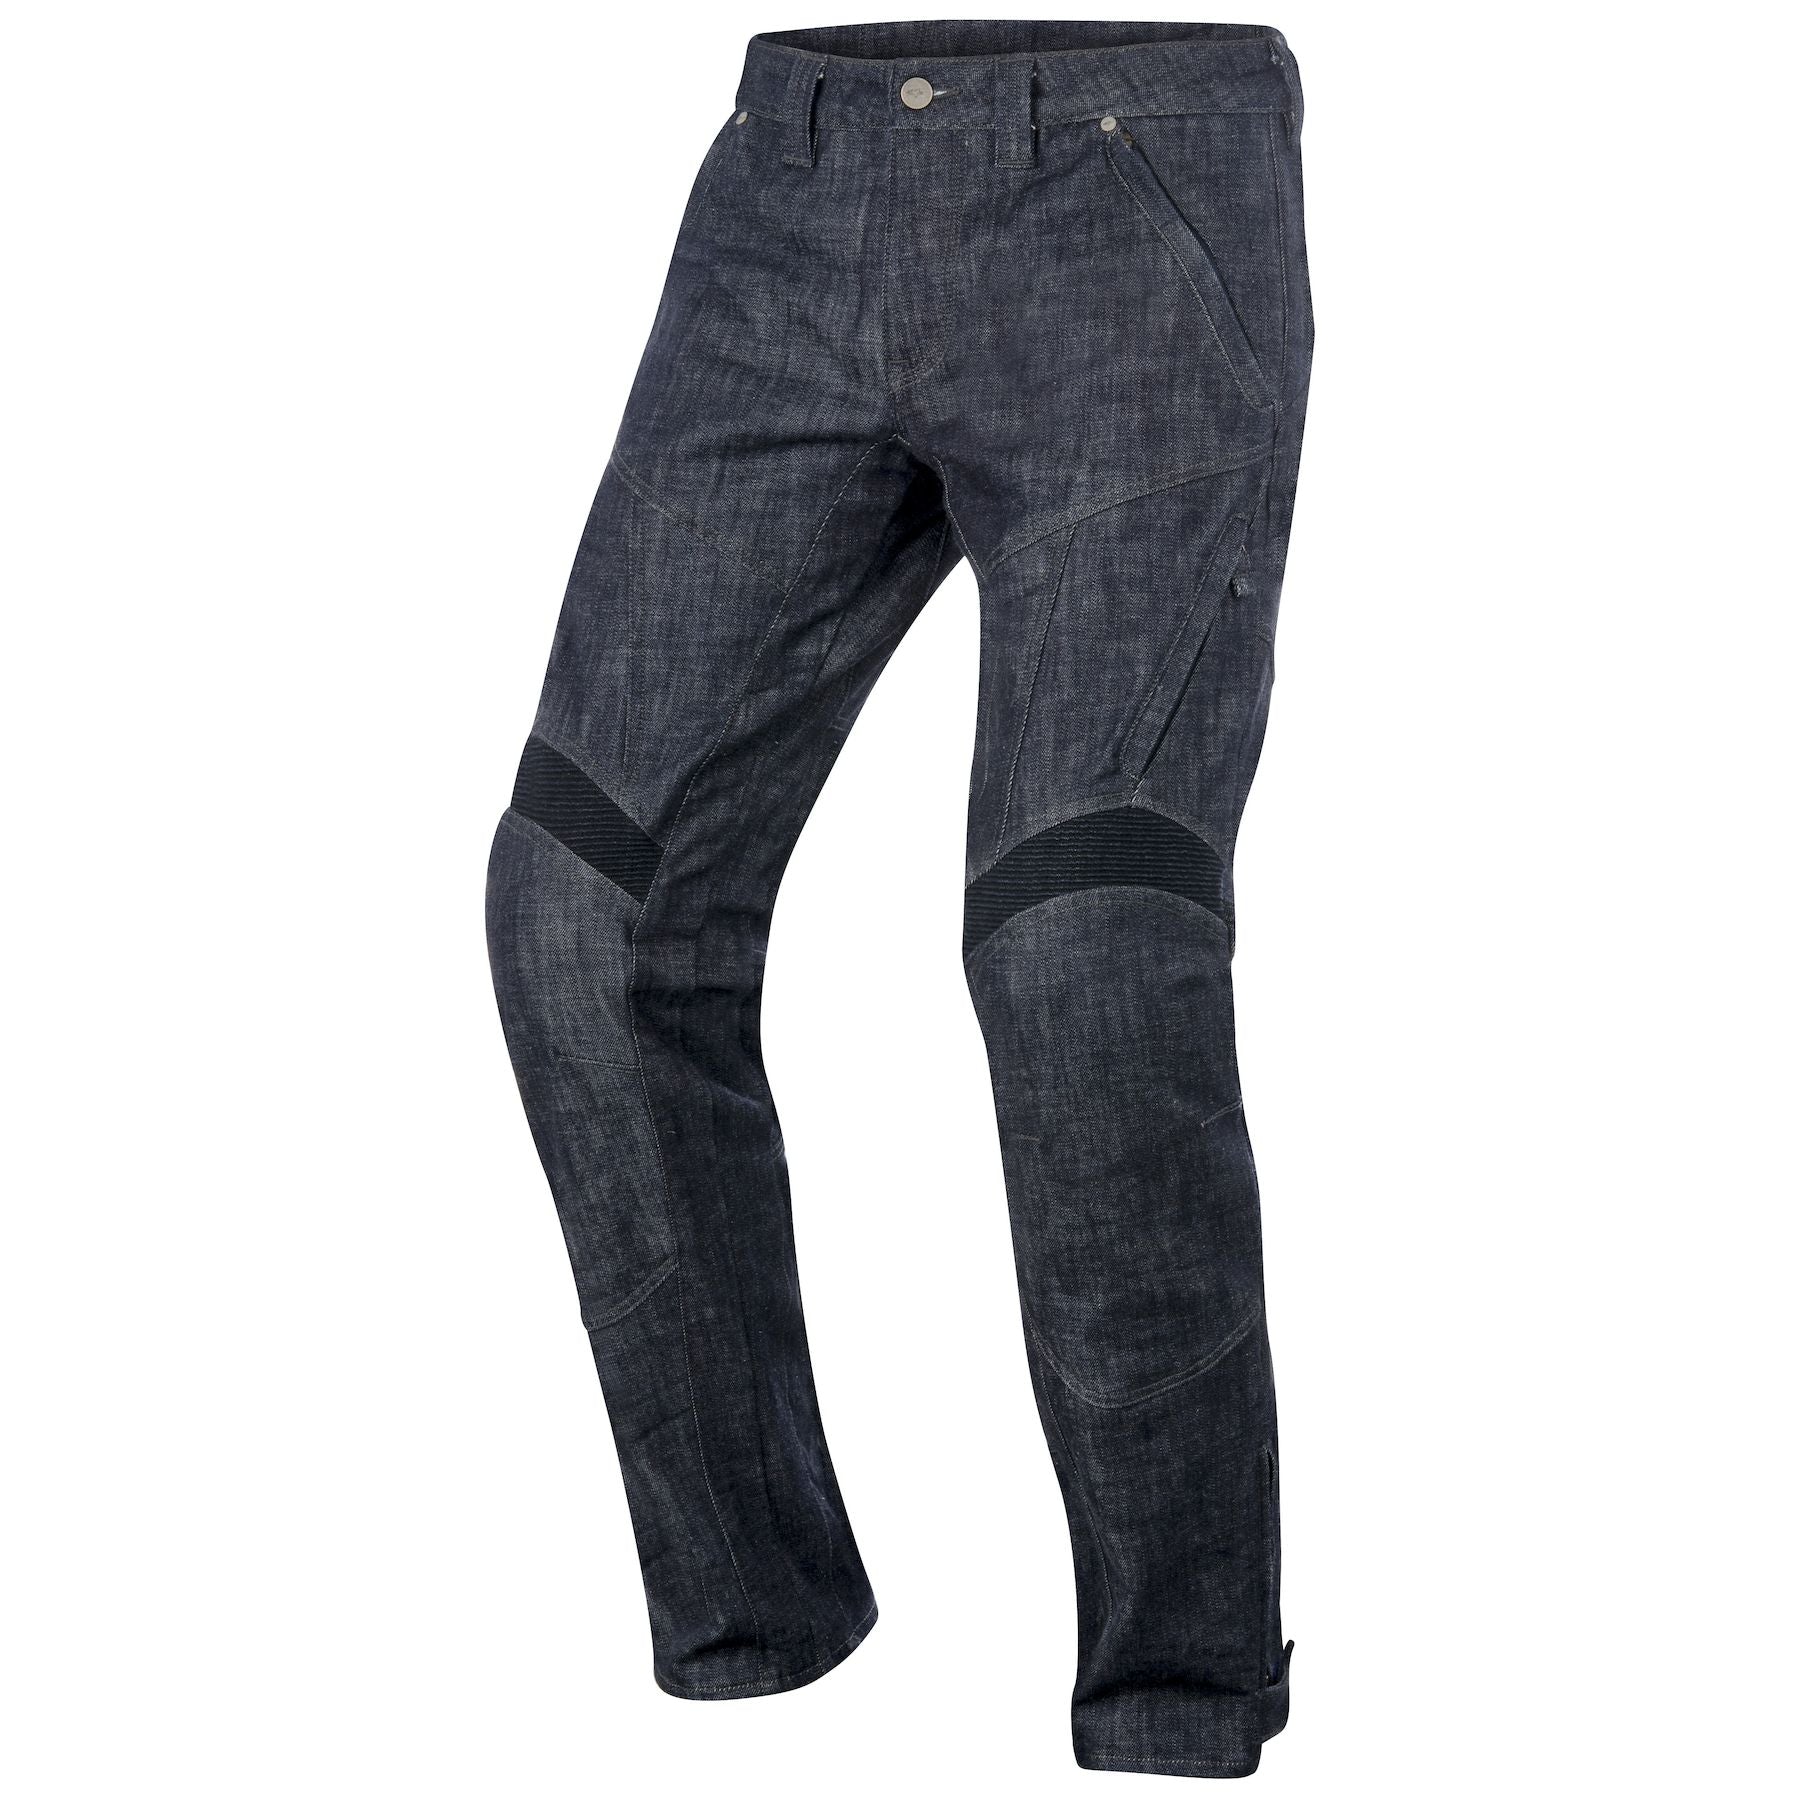 Davis TF Motorcycle Jeans | Urban riding denim with a twist of color. Stay  safe. Stand out.